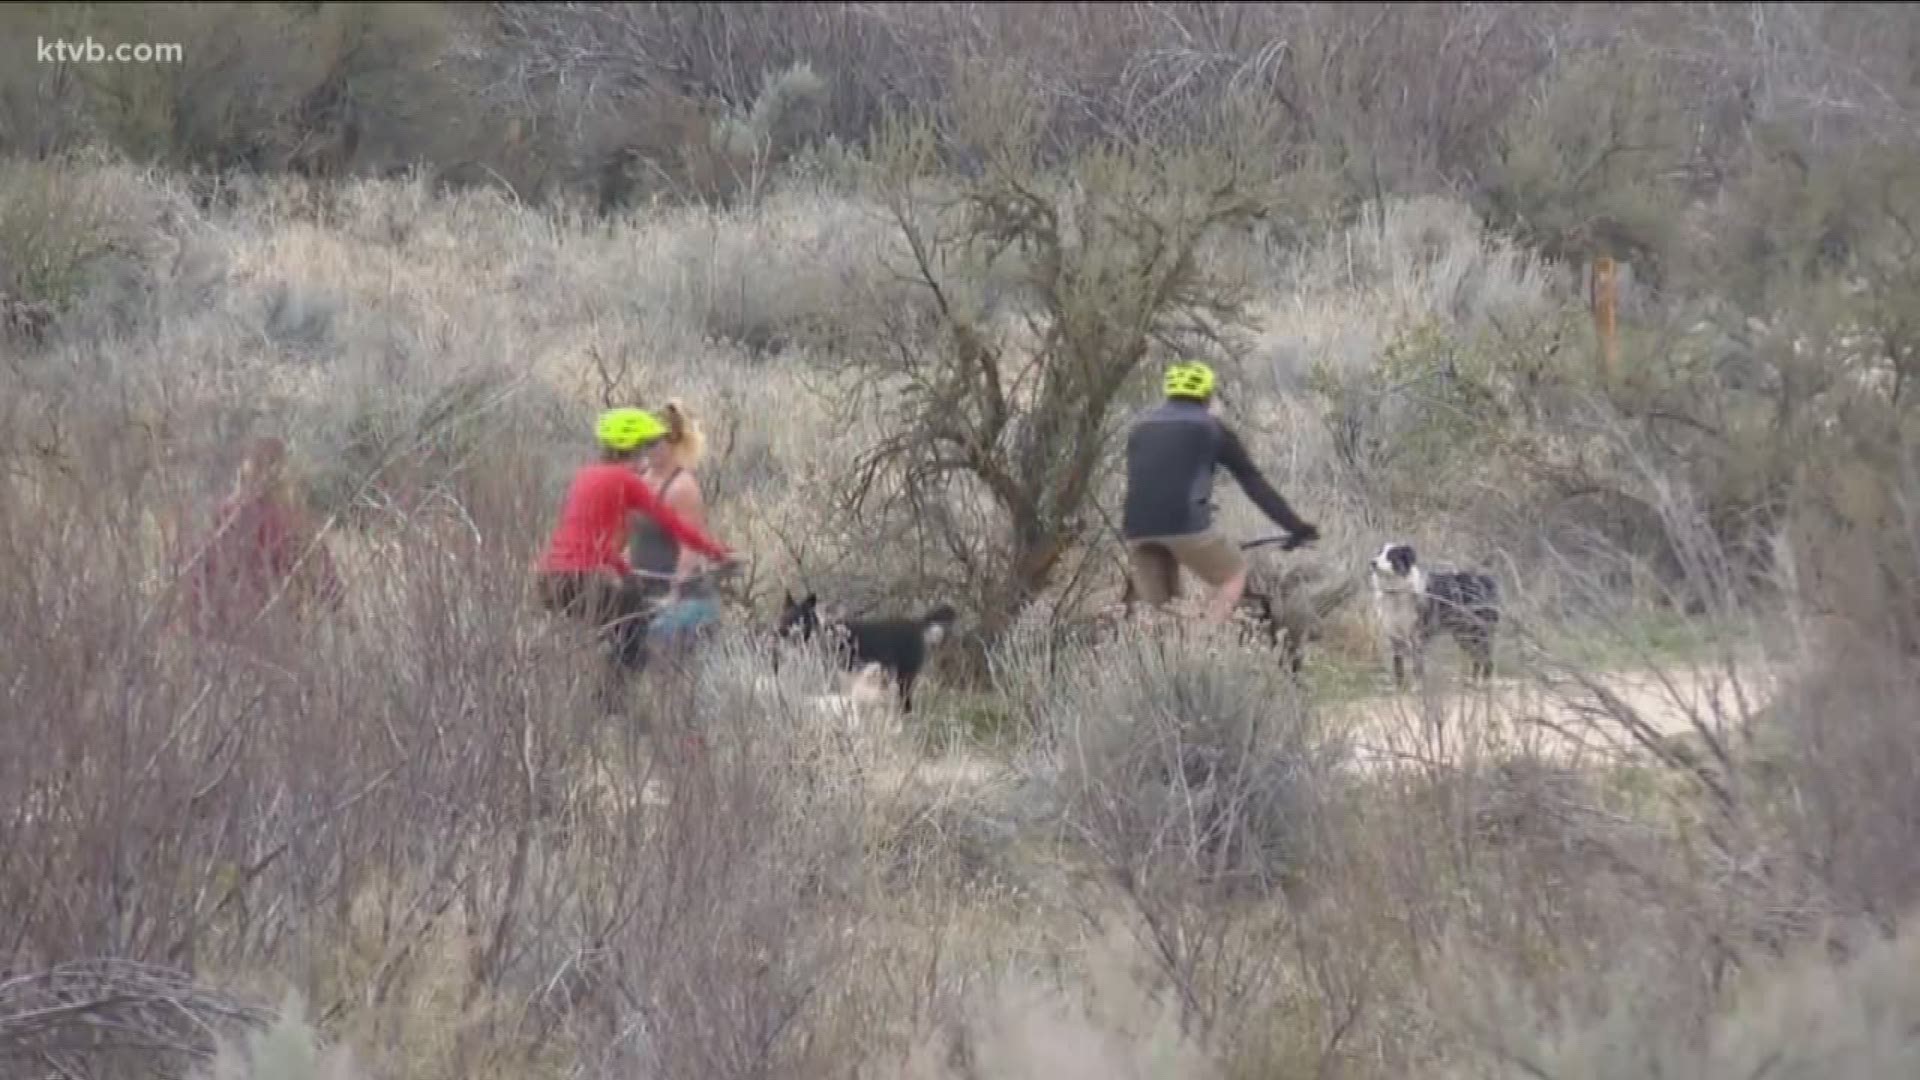 More and more people are getting outside to enjoy a hike in the foothills or along the Boise Greenbelt. One thing to be on the lookout for is ticks.